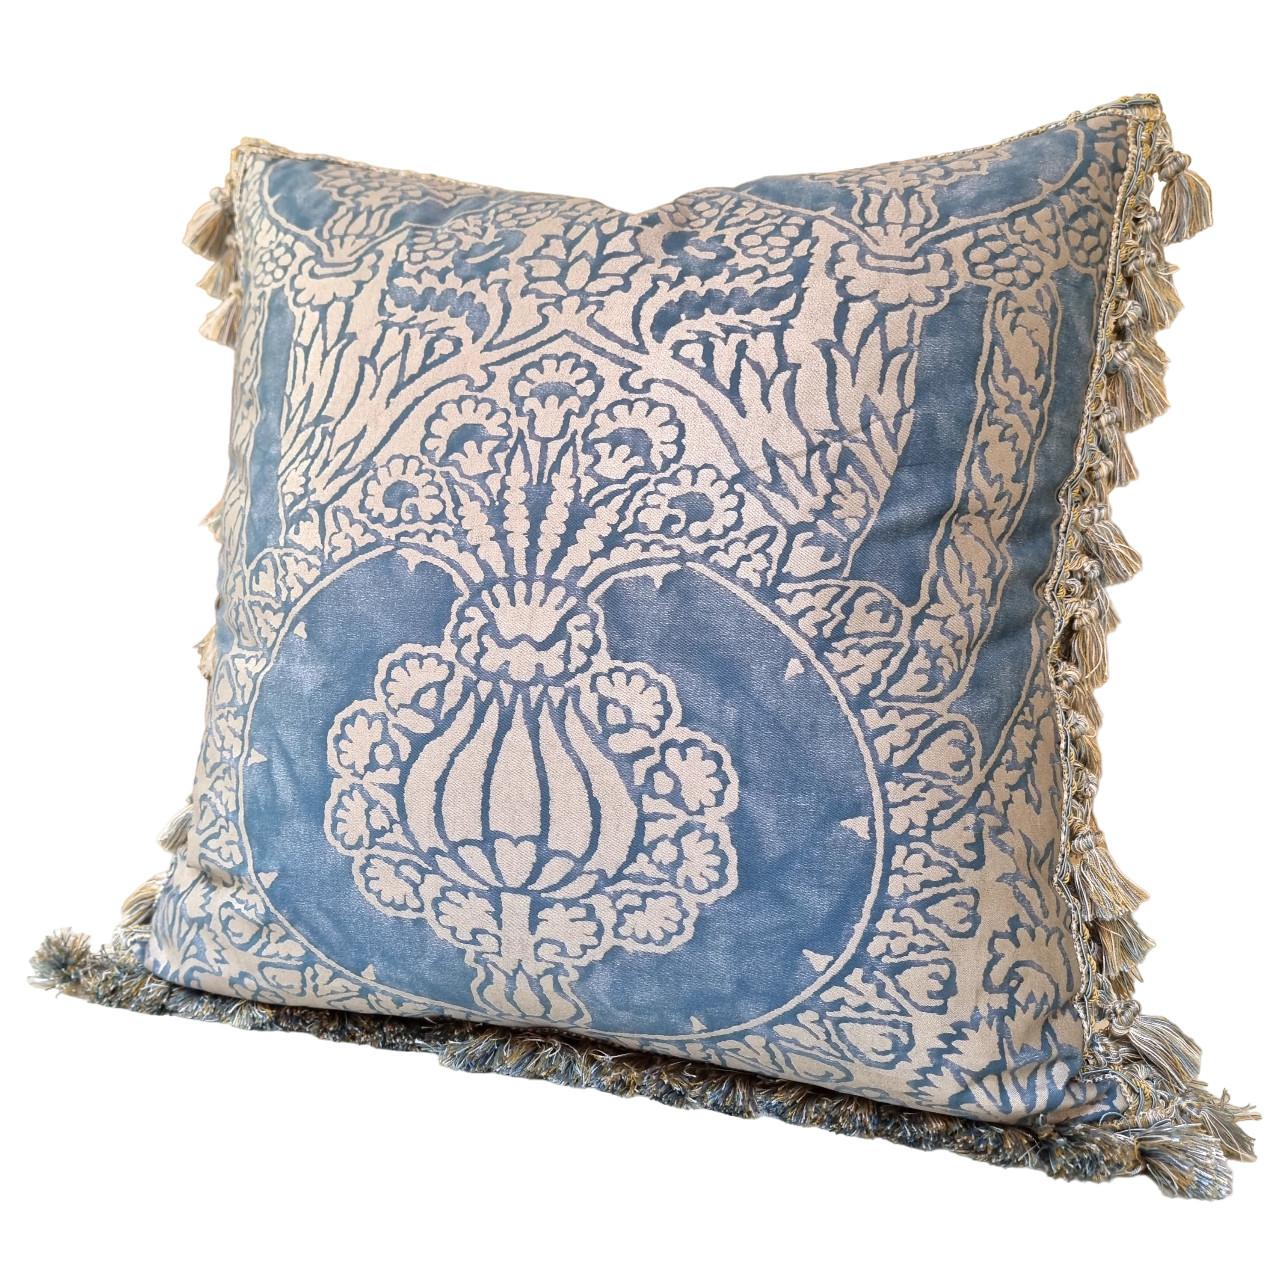 Hand-Crafted Double Sided Fortuny Fabric Pillow Tassel Trim Blue Silvery Gold Nicolo Pattern For Sale